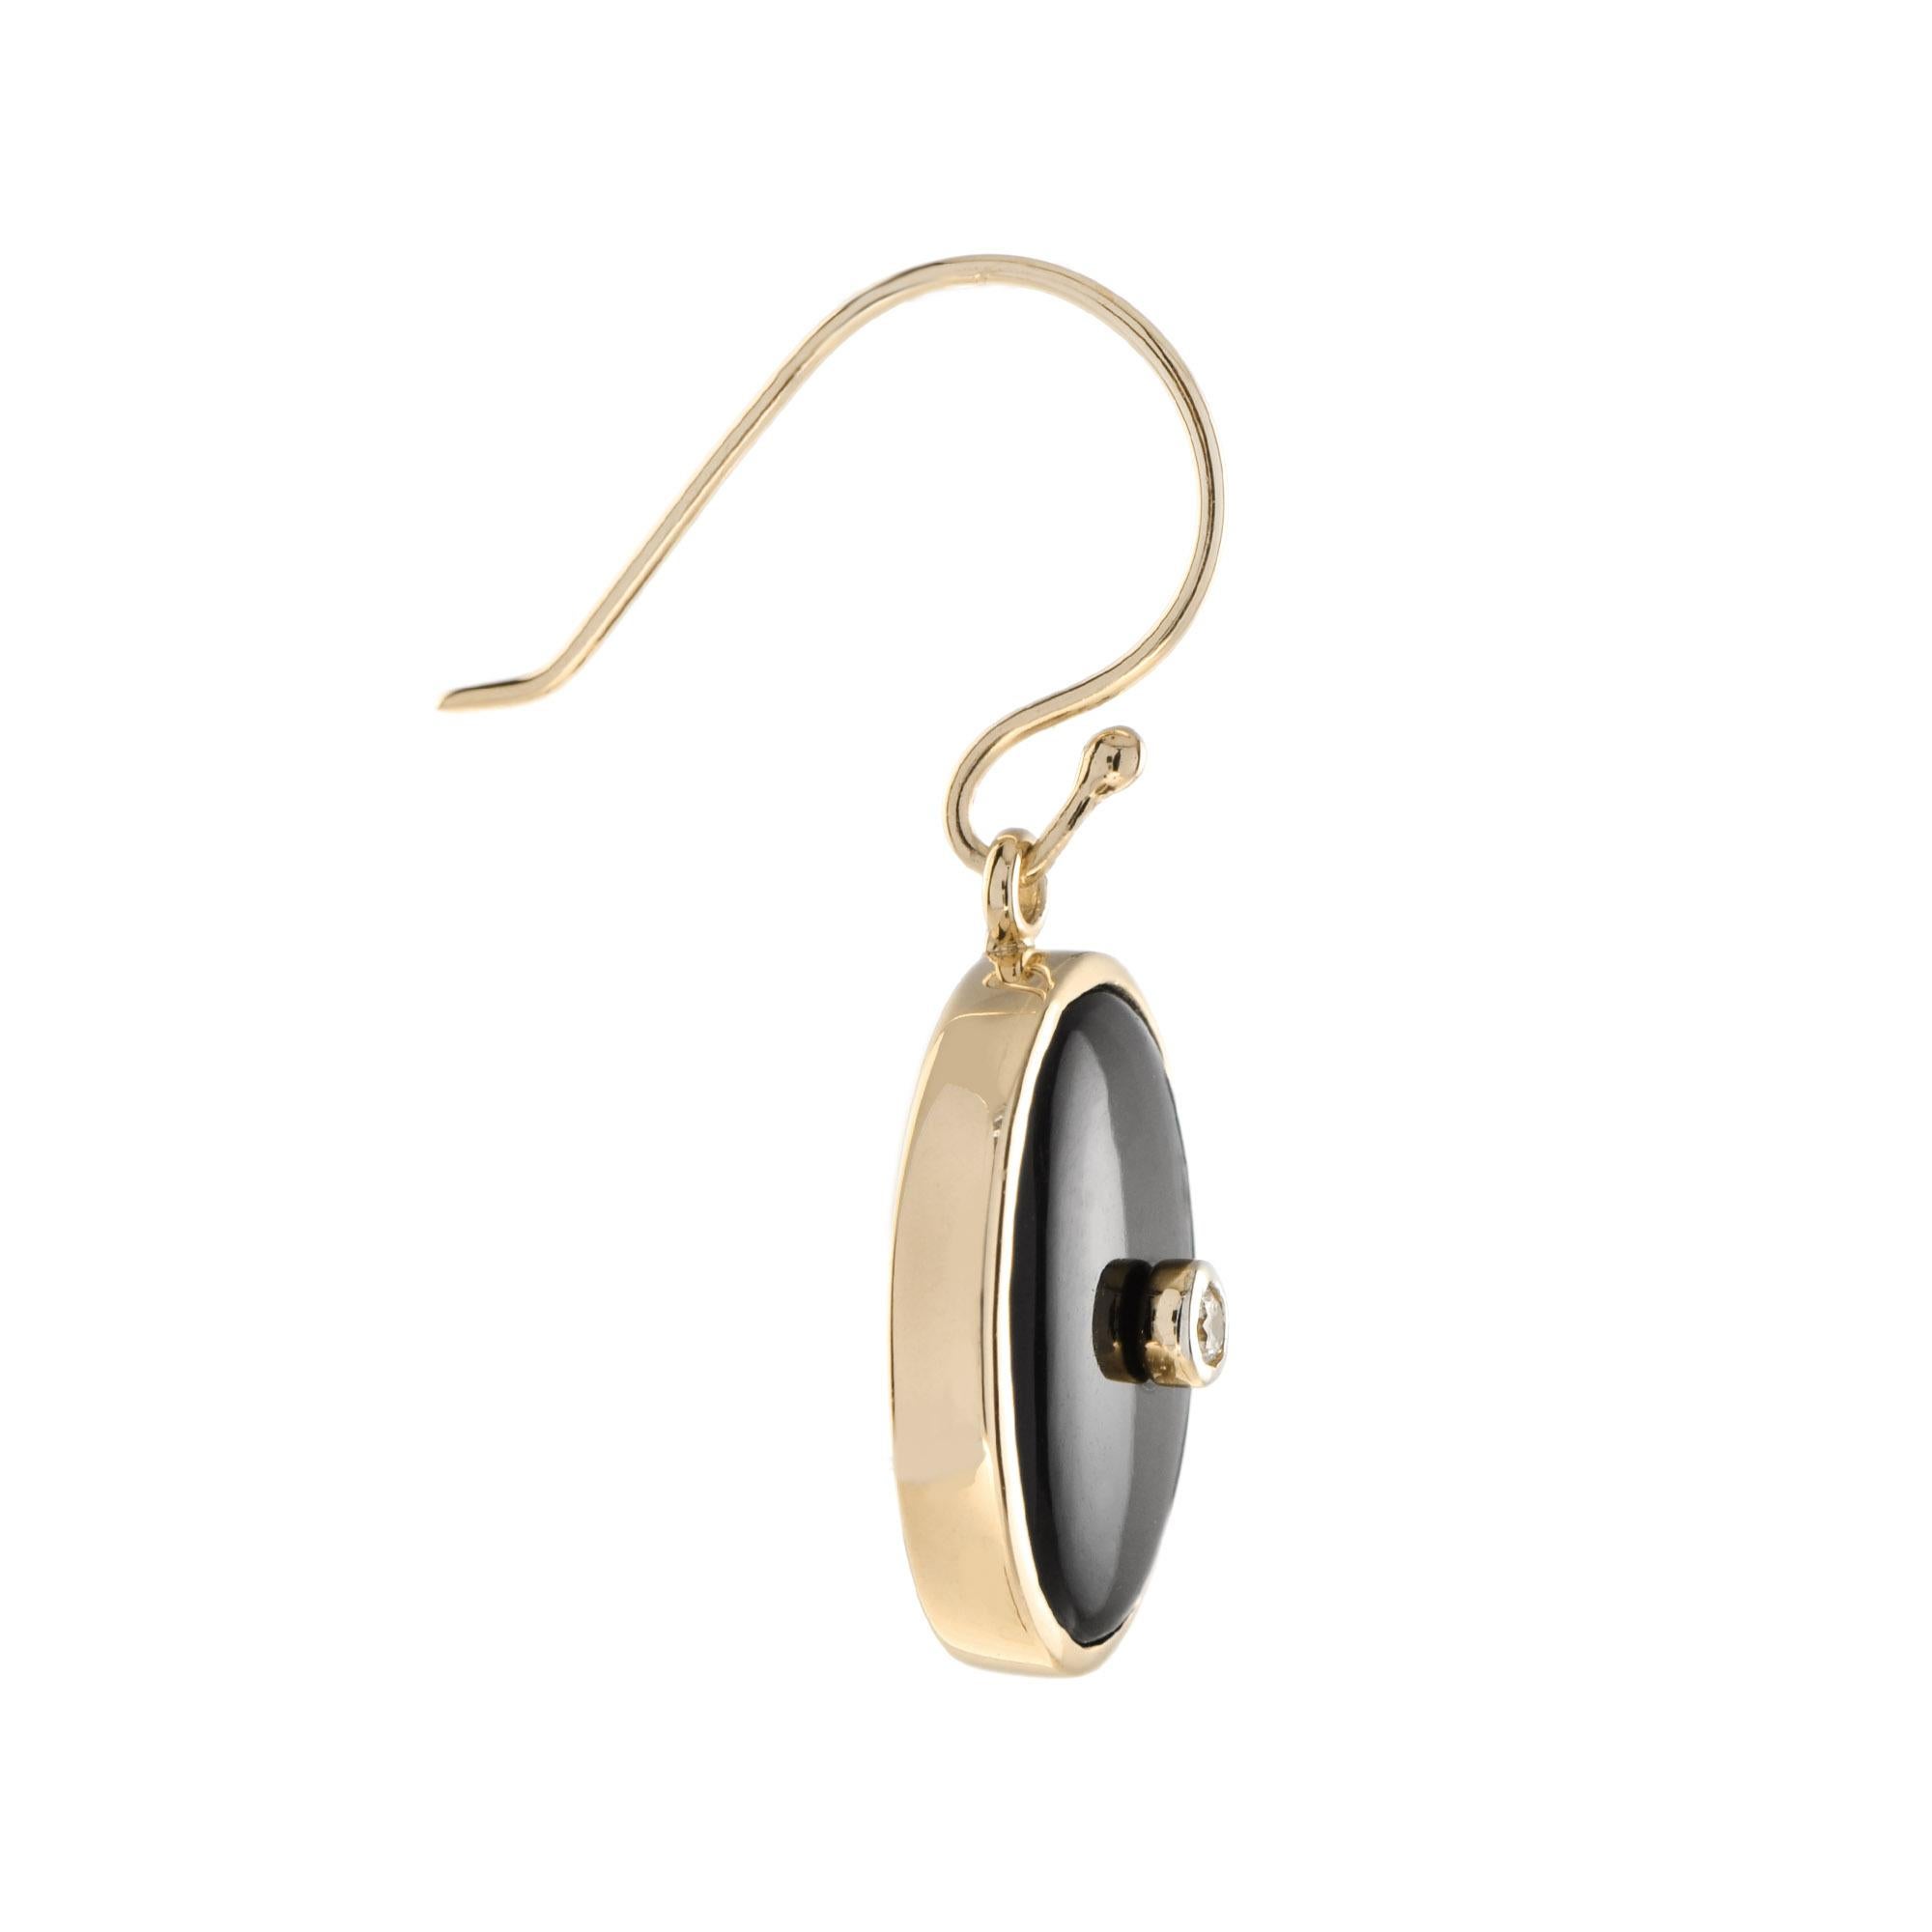 These eye catching bezel set diamond and onyx earrings will add a uniqueness to your outfit with the presence of onyx and a yellow gold movement hook. 

Information
Style: Art Deco
Metal: 14K Yellow Gold
Width: 13 mm.
Length: 31 mm.
Weight: 3.80 g.